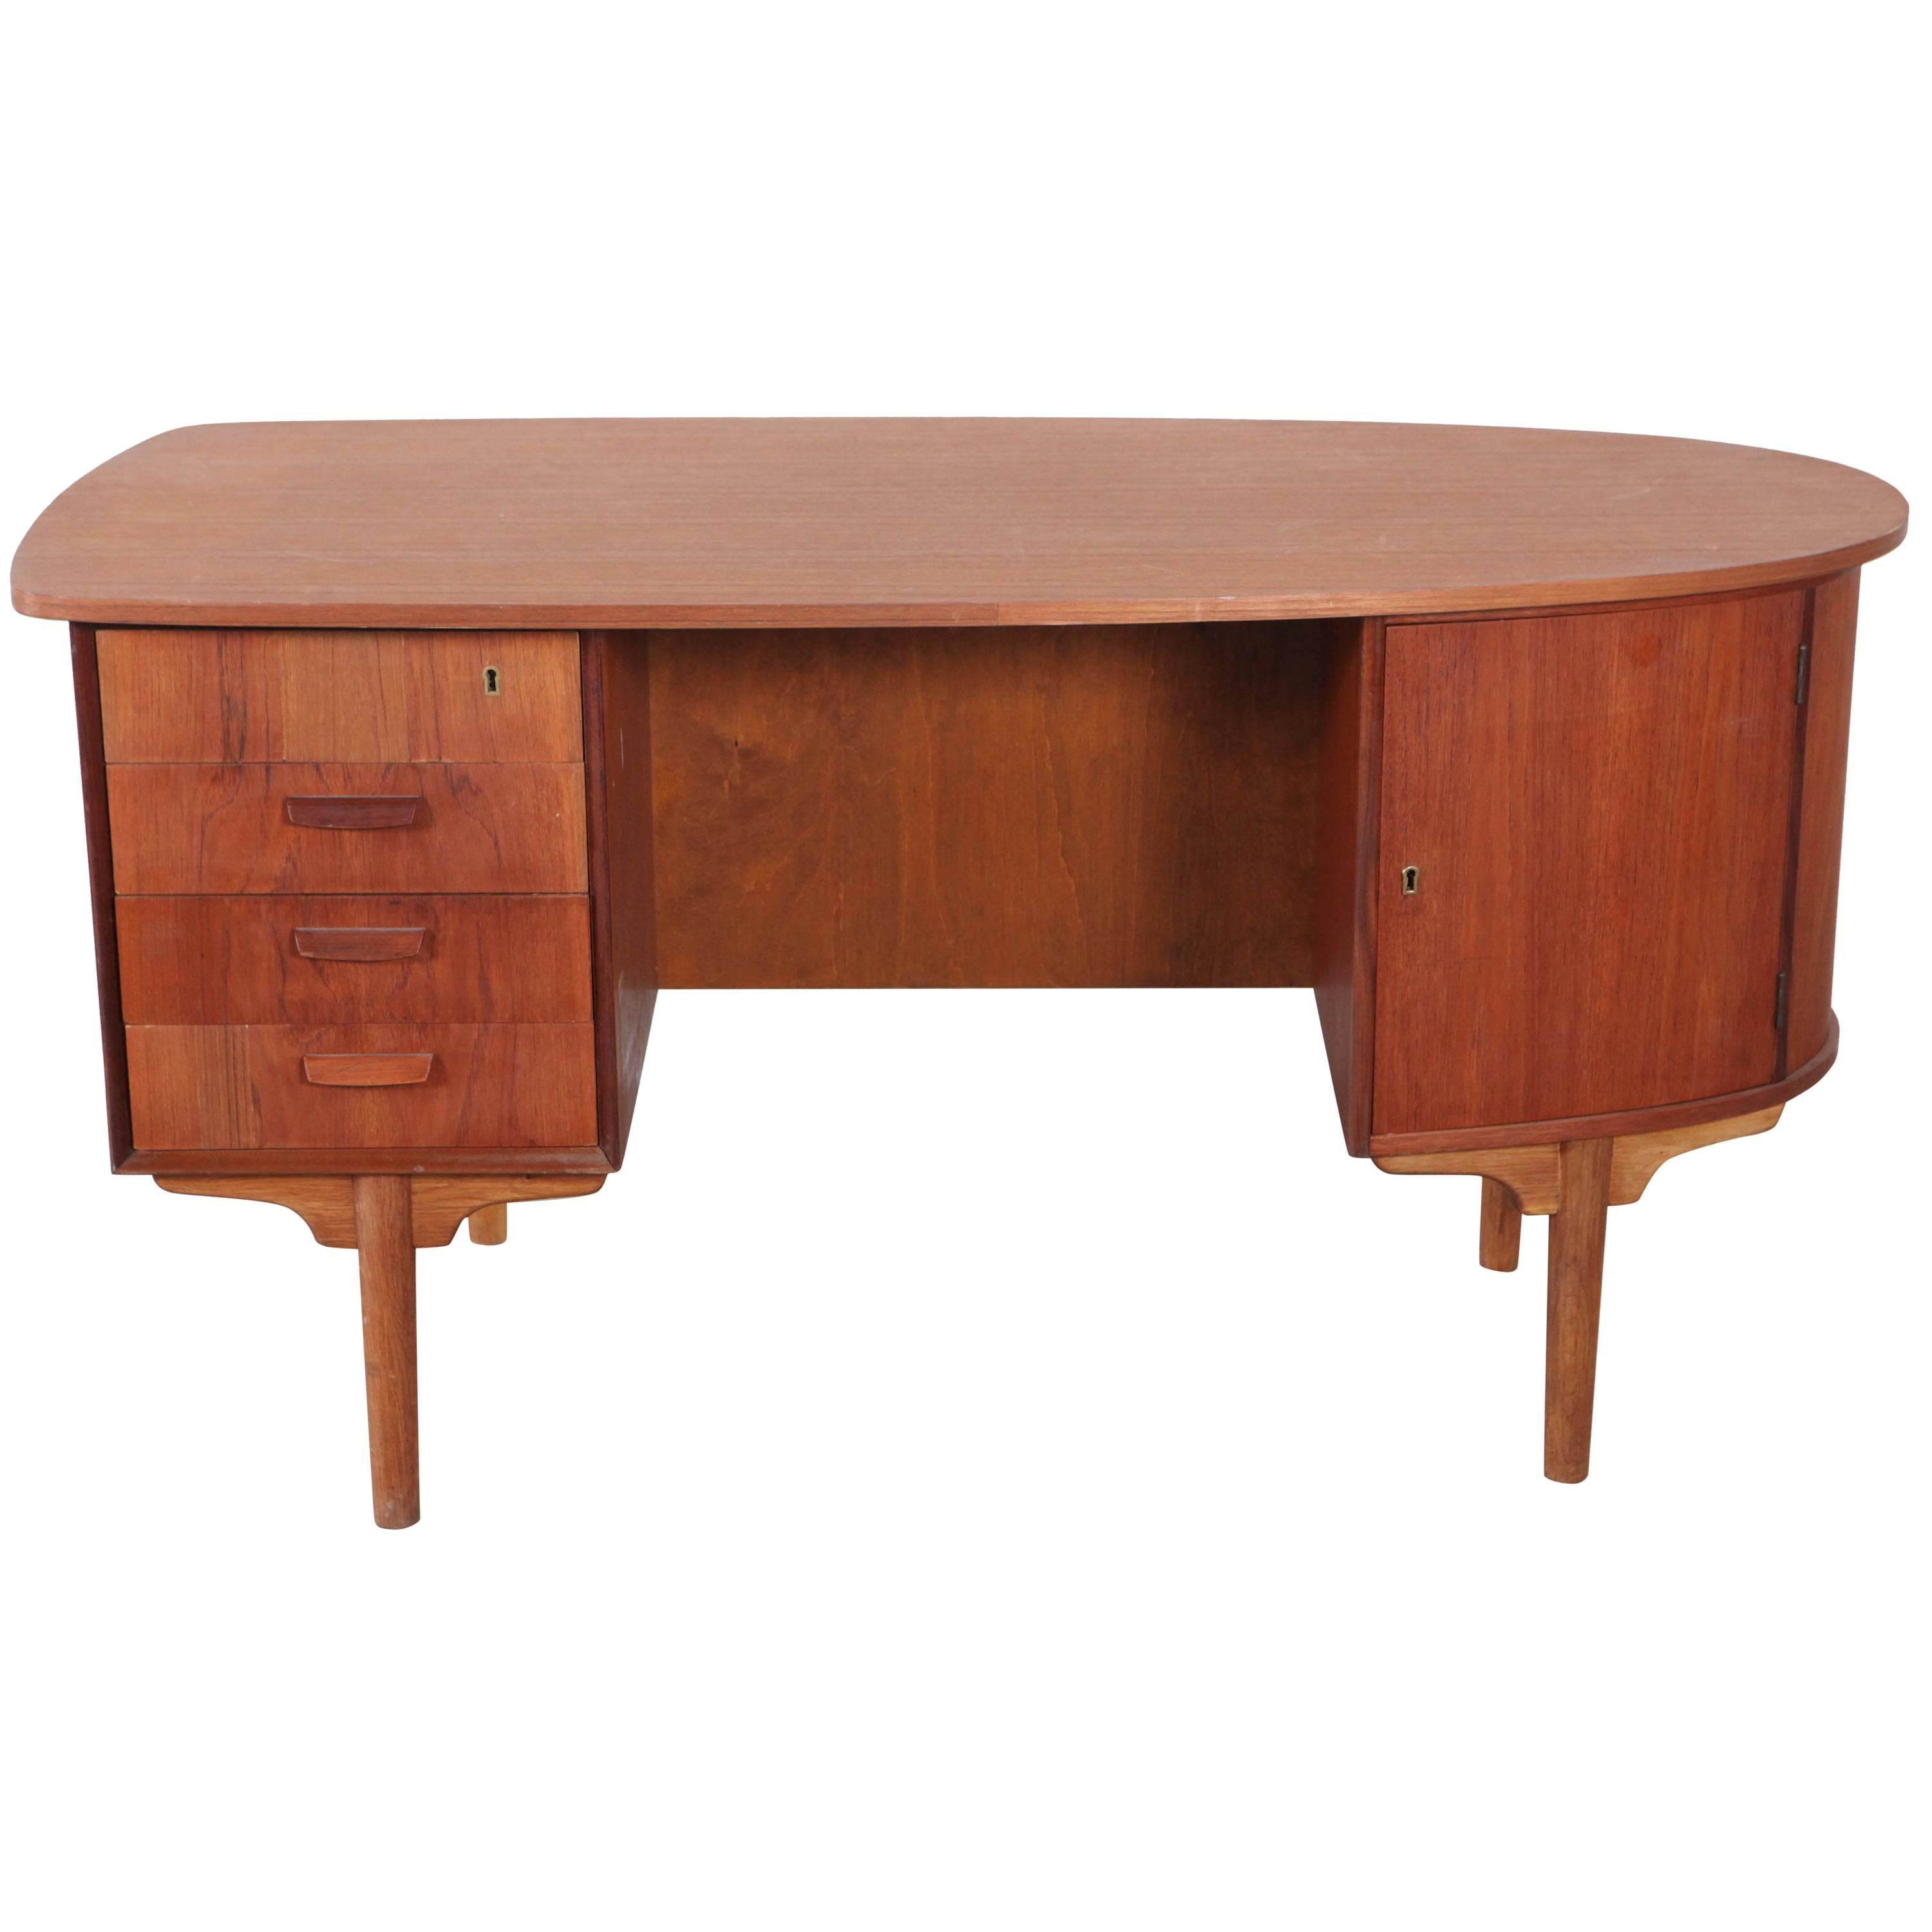 Curved "Journalist" Desk with Open Back Display Shelf